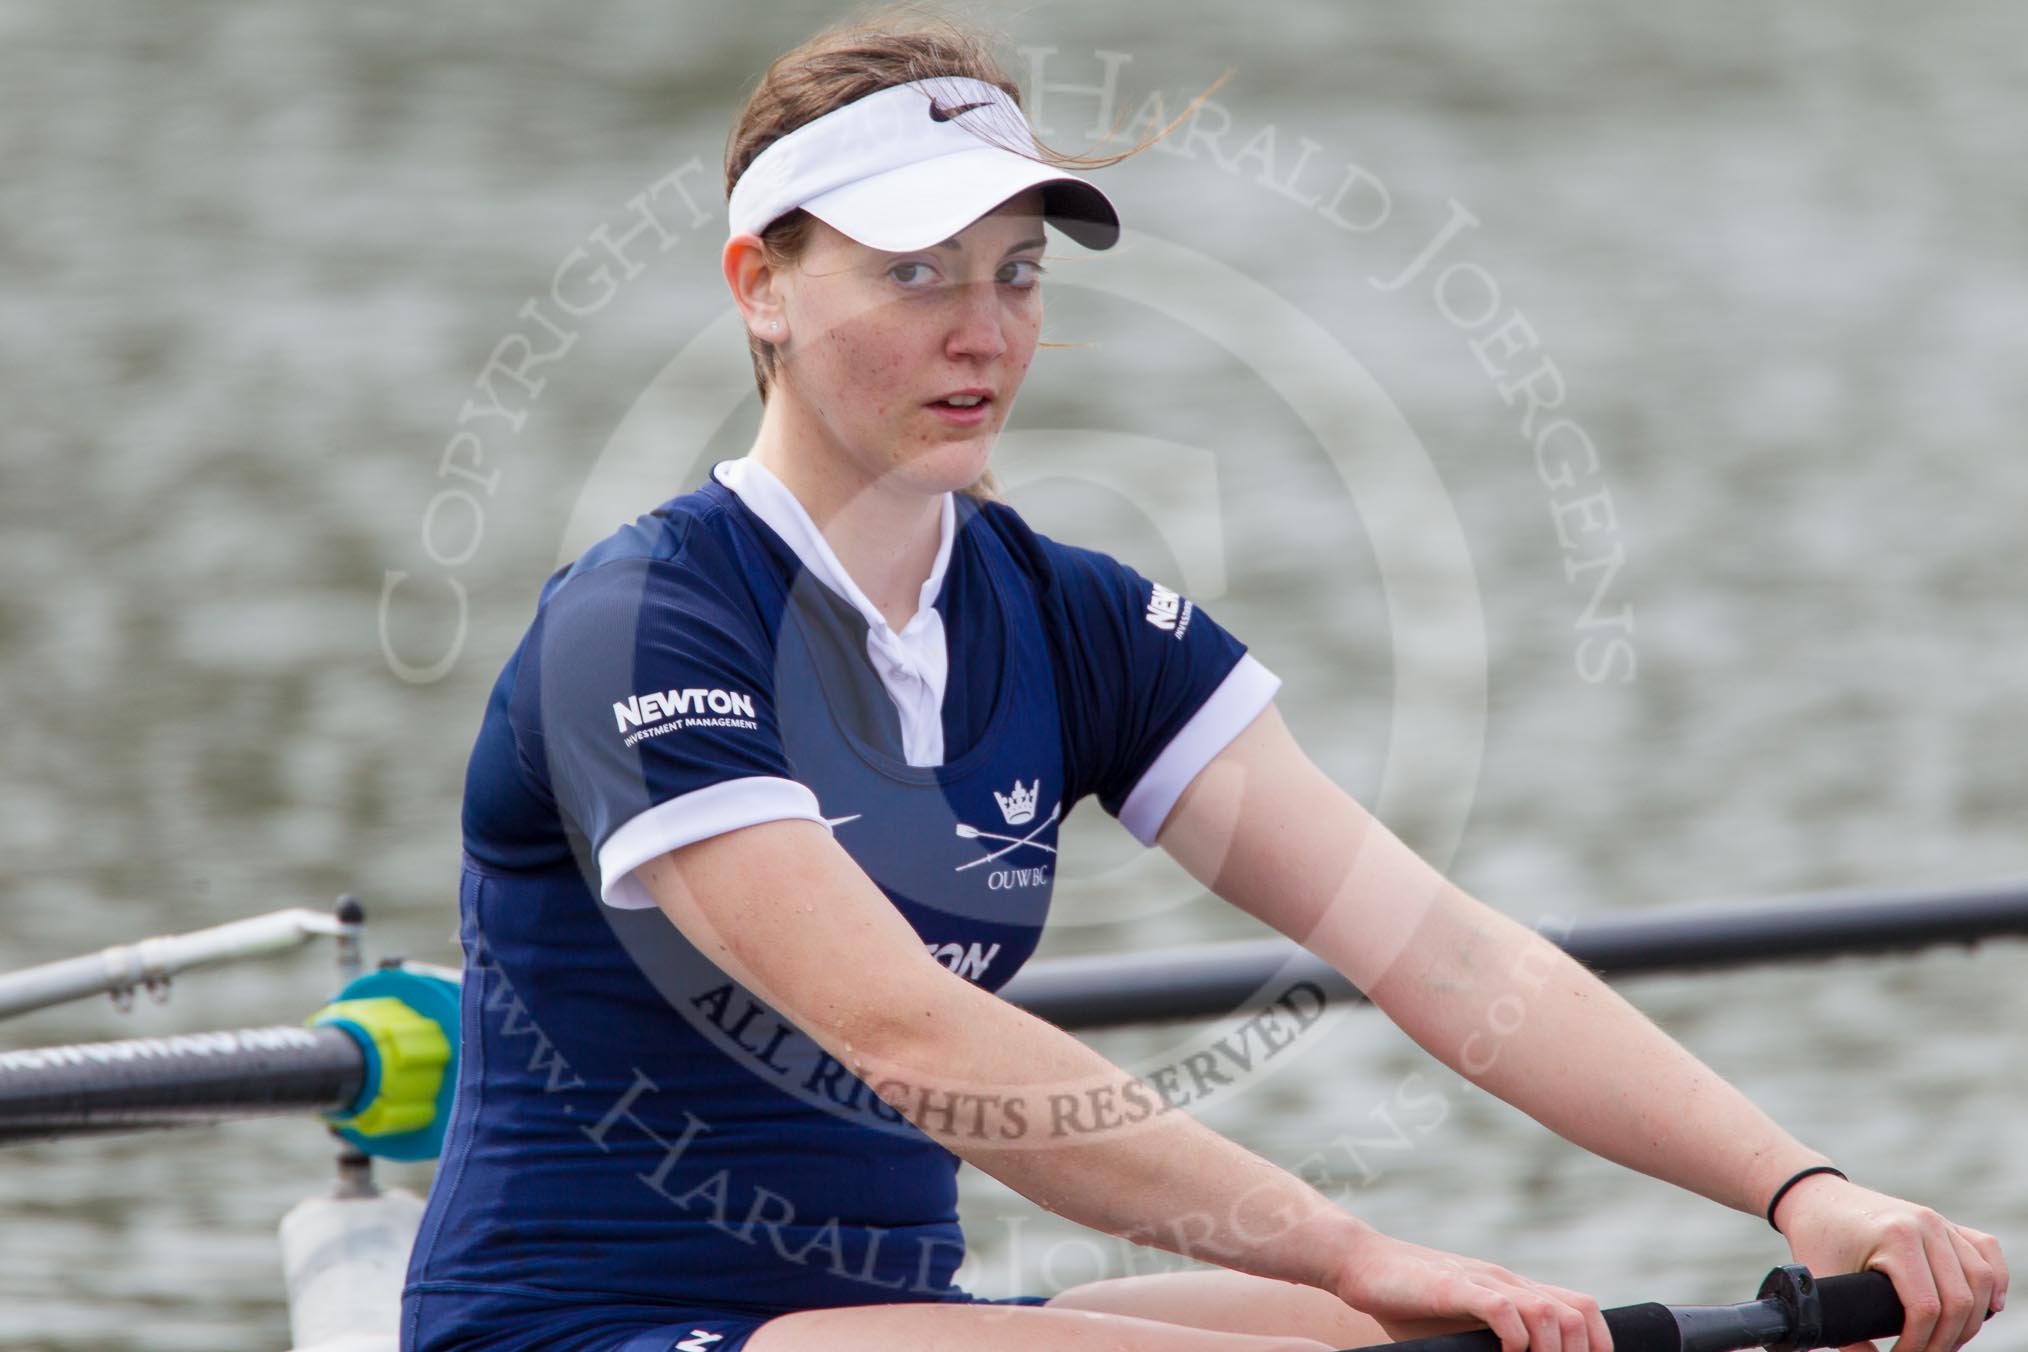 The Women's Boat Race and Henley Boat Races 2014: After the Women's Reserves - Osiris v. Blondie race. Osiris (Oxford) with 2 seat Hannah Ledbury..
River Thames,
Henley-on-Thames,
Buckinghamshire,
United Kingdom,
on 30 March 2014 at 14:25, image #191